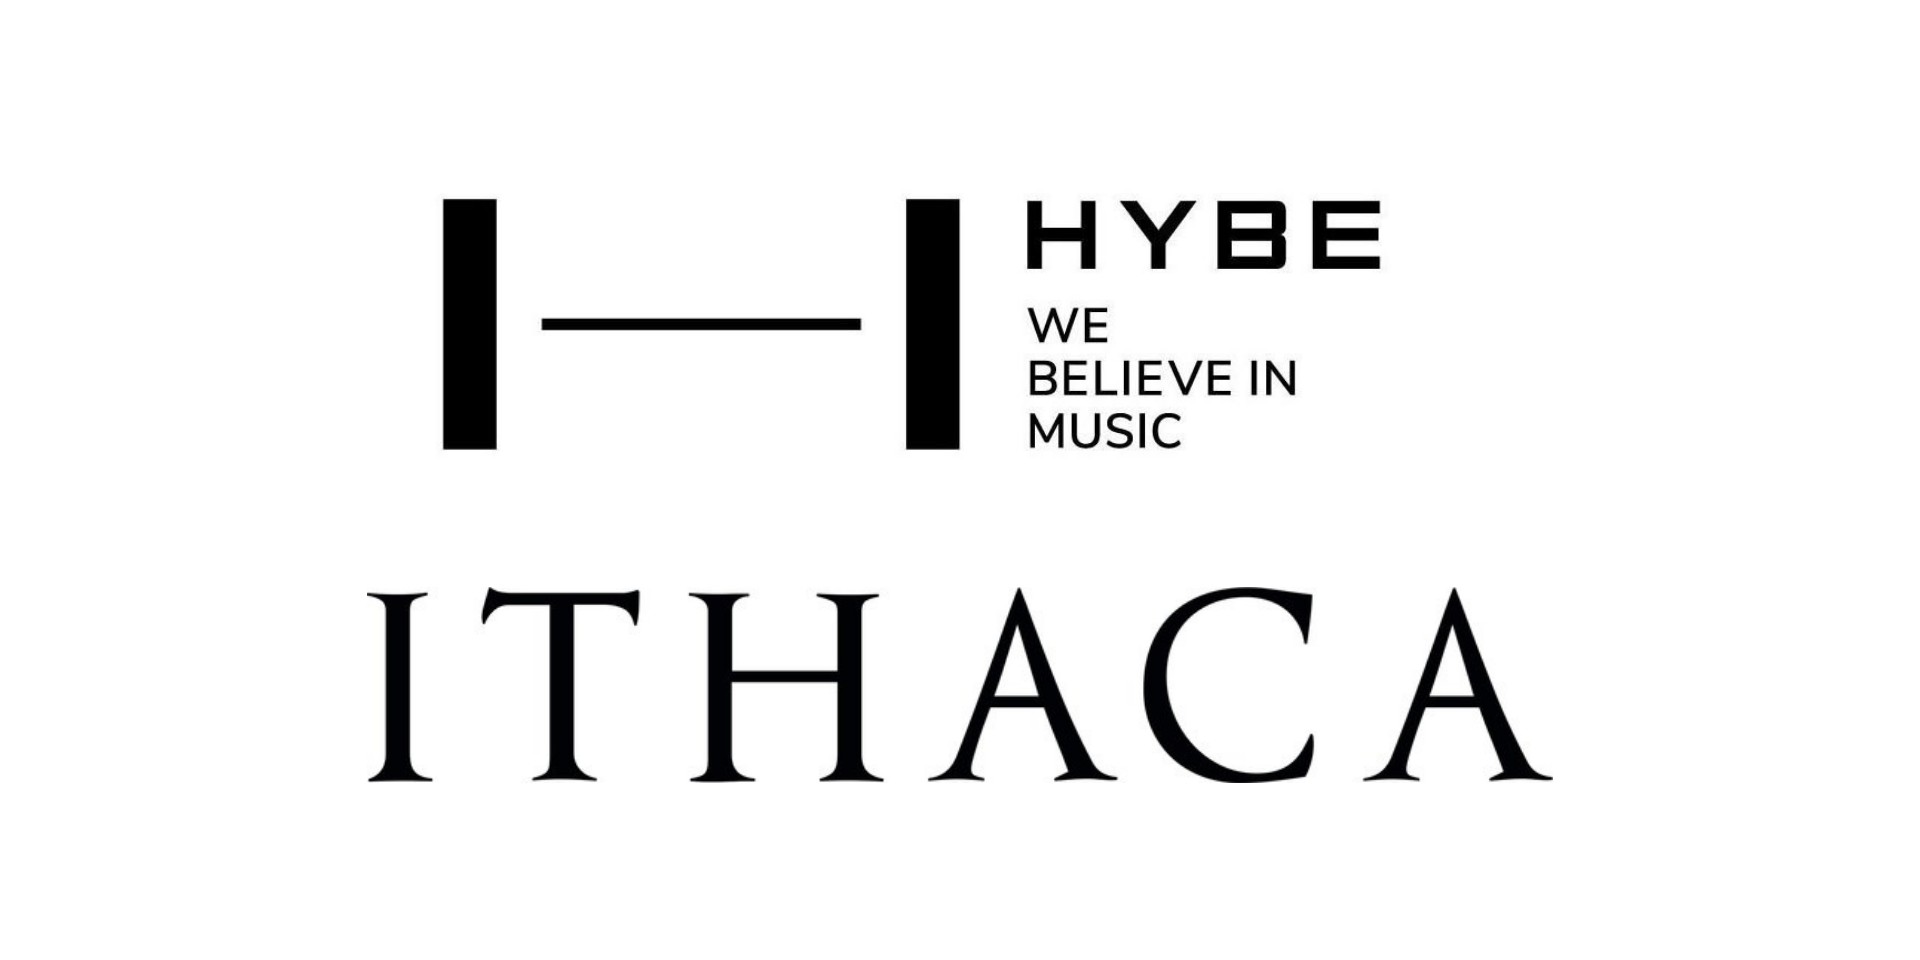 HYBE, formerly Big Hit Entertainment, teams up with Scooter Braun's Ithaca Holdings to establish a "new paradigm" in the music industry